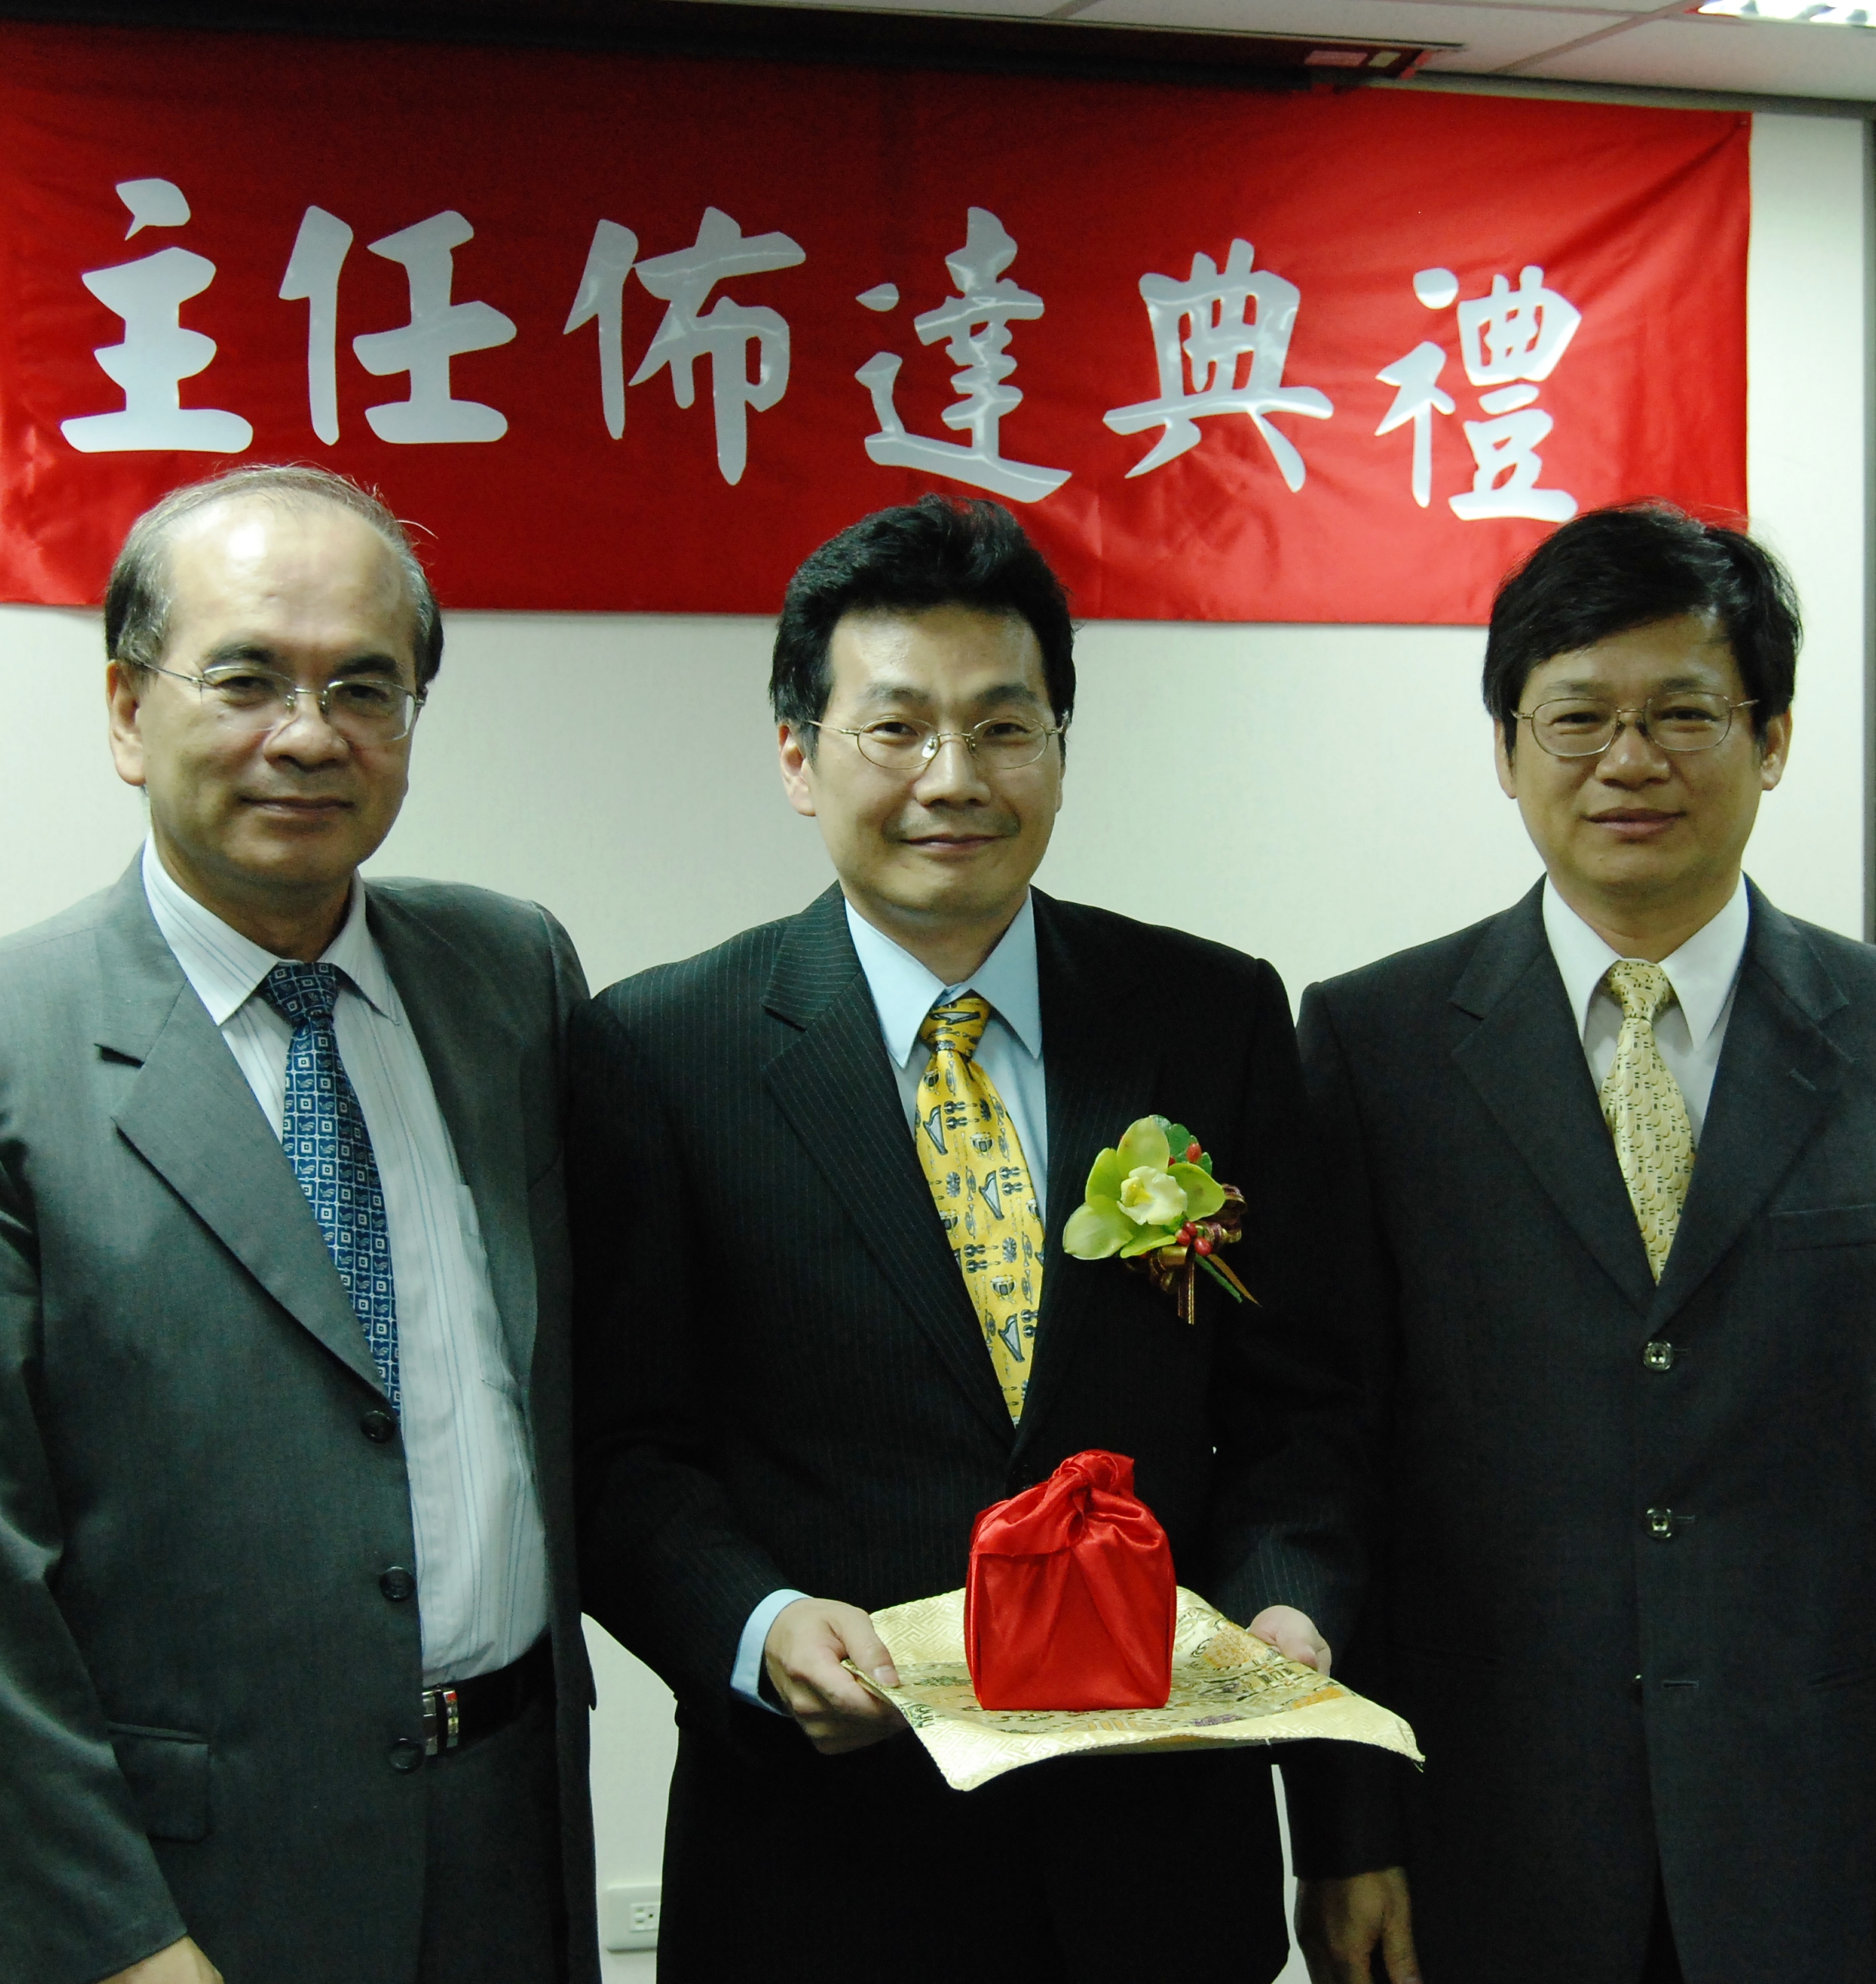 Overseen by President Wen-Hwa Chen (left), Acting Director General Yeong-Her Wang (right), gives the official seal to the new director general Bou-Wen Lin at the inauguration ceremony. 